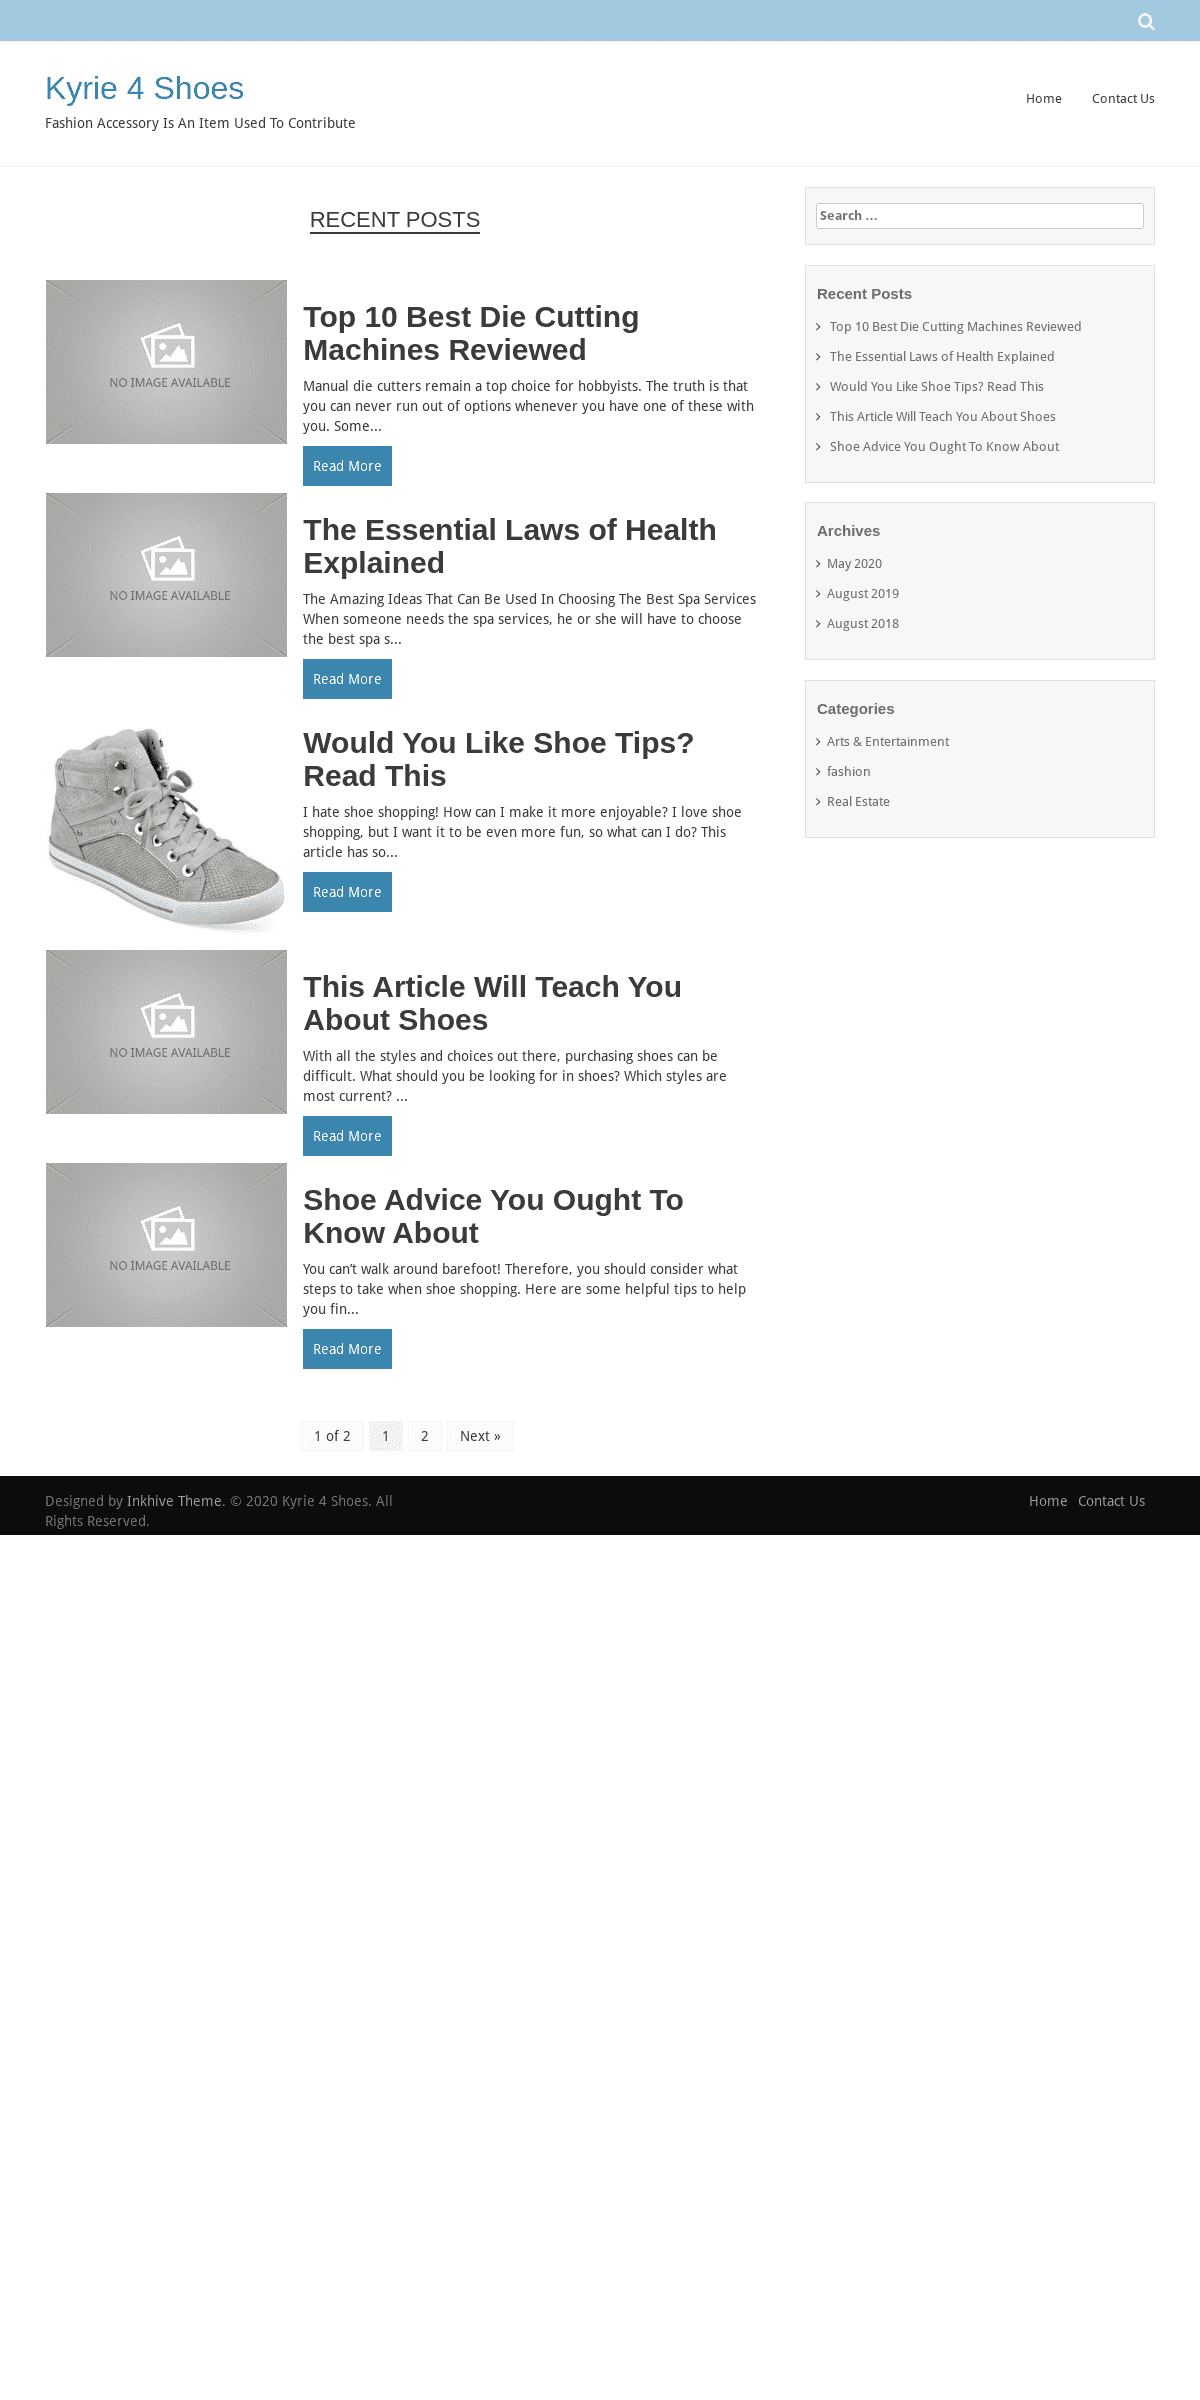 A complete backup of kyrie4-shoes.us